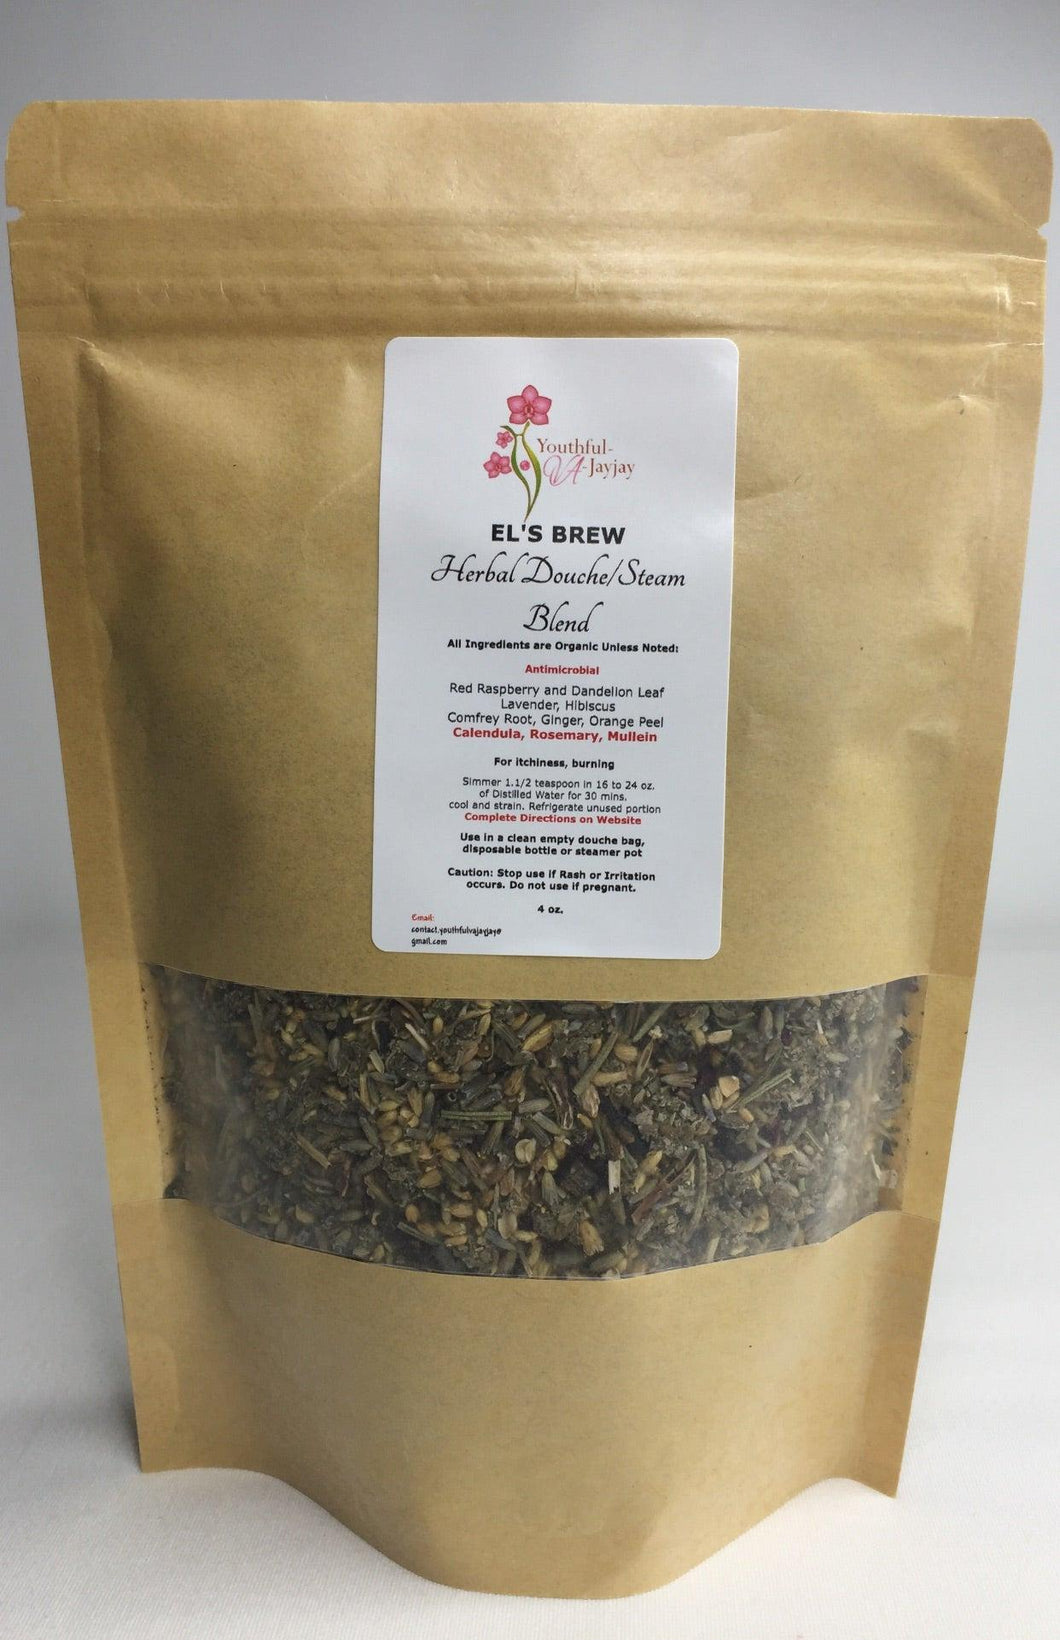 EL'S BREW- Organic Herbal Steam/Douche Blend, Handcrafted ANTIMICROBIAL USE, 4oz. - Image #1